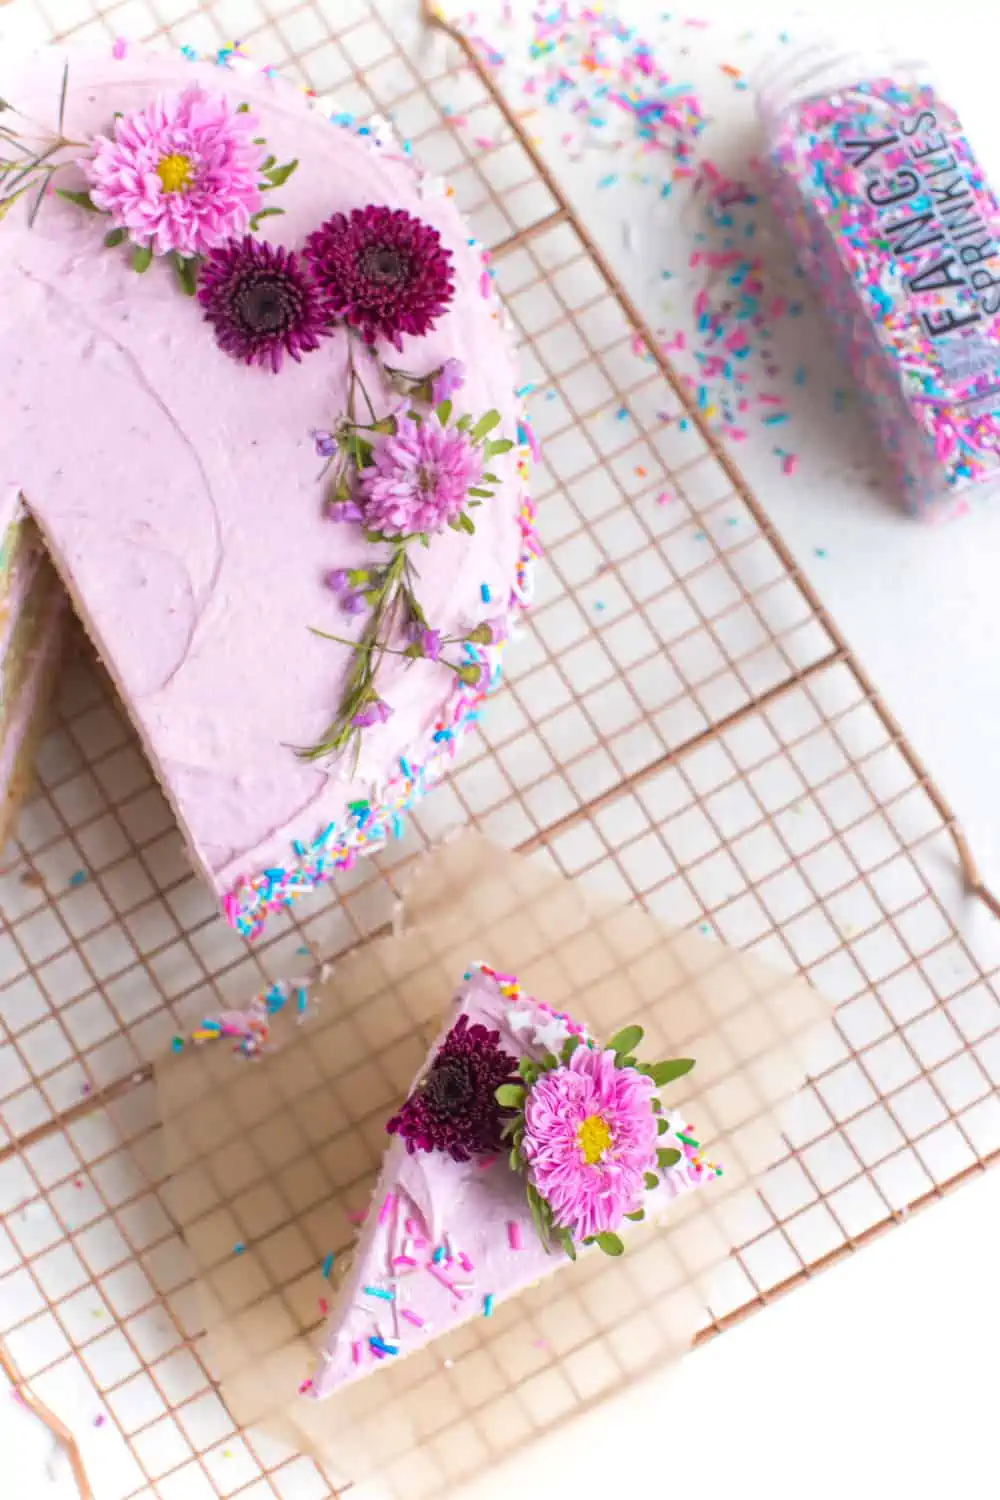 Vegan cake with pink icing made with natural food coloring and sprinkles. 